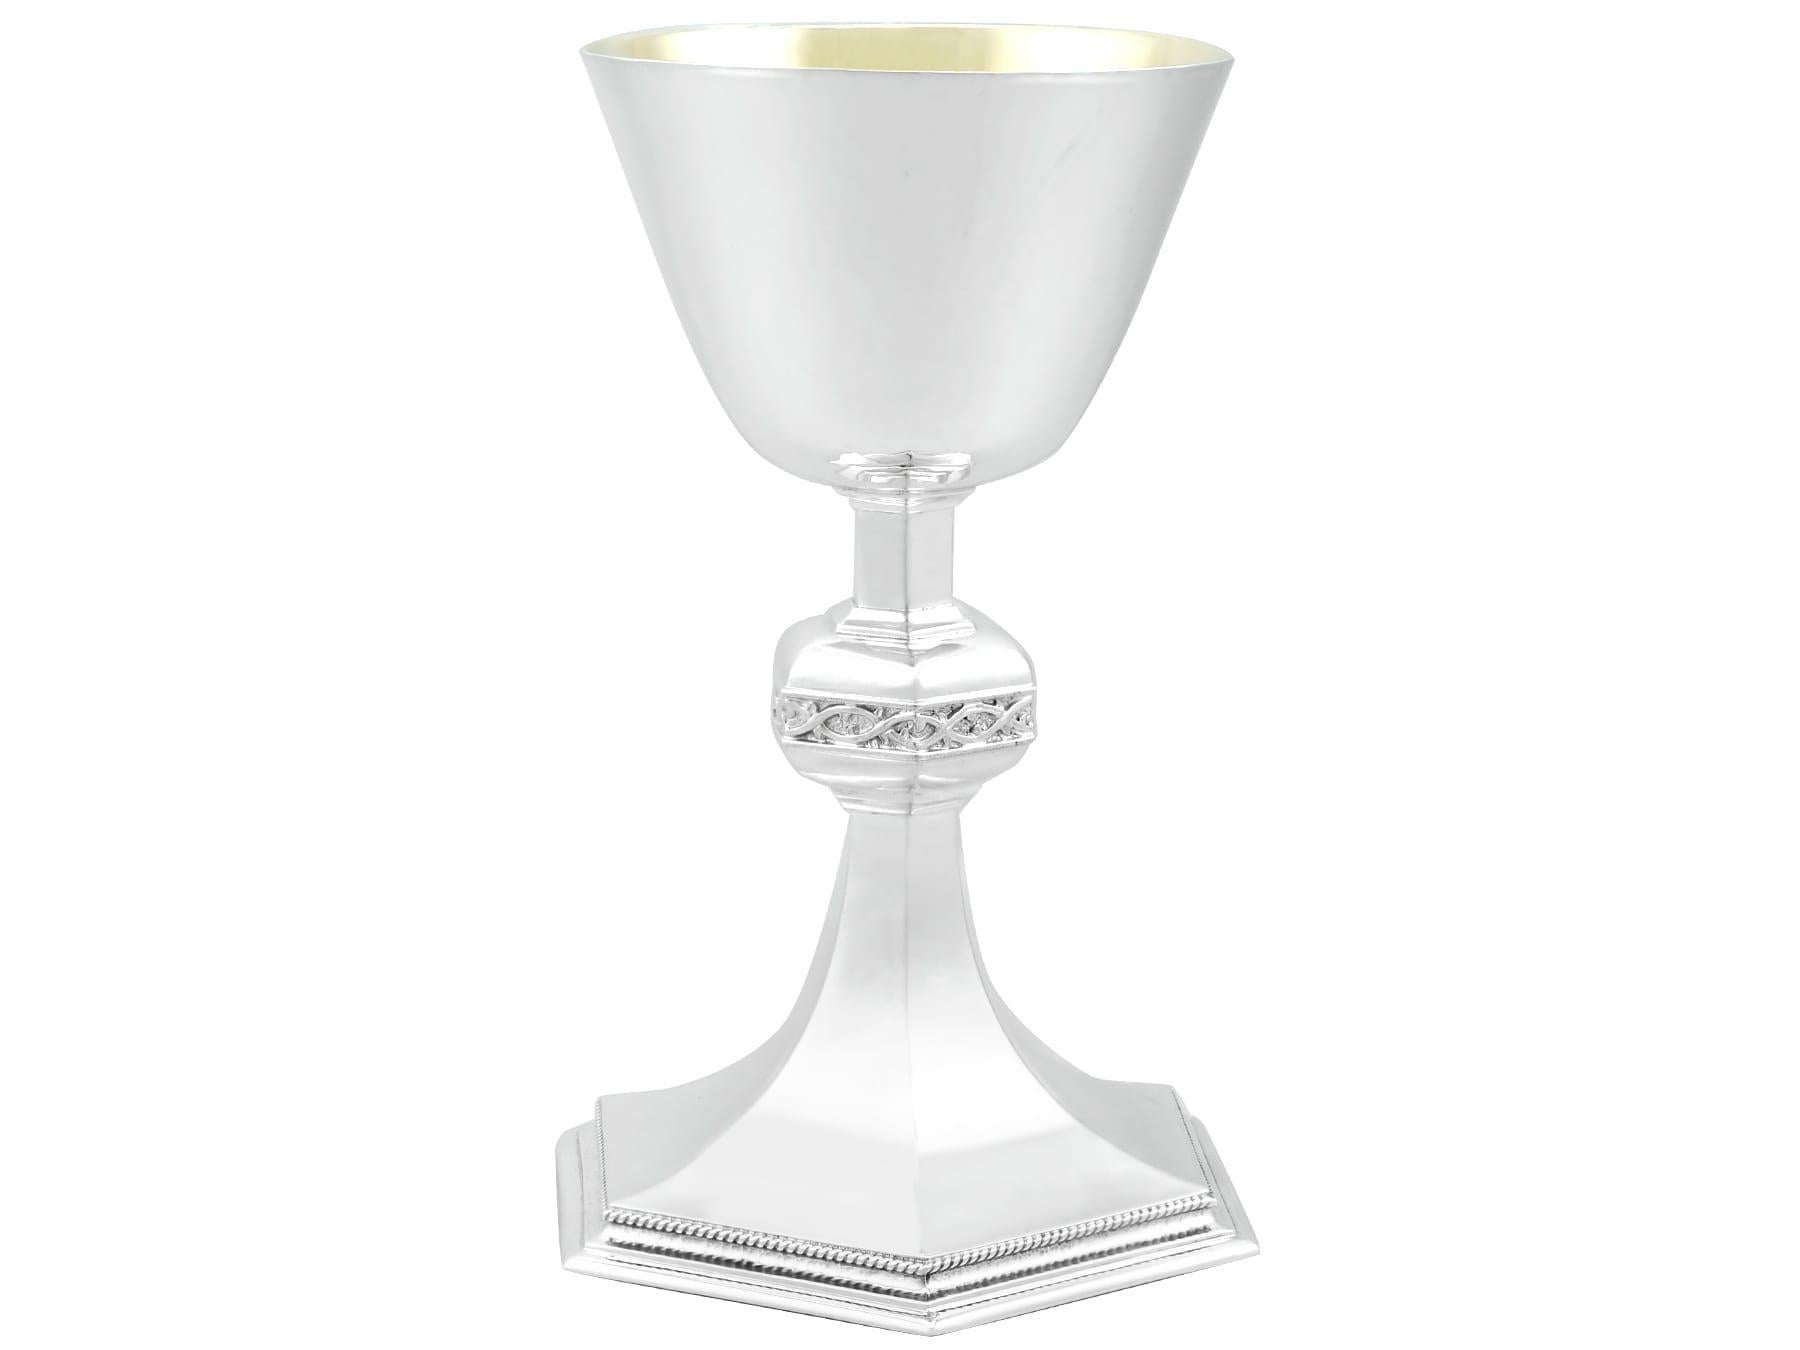 An exceptional, fine and impressive vintage Elizabeth II English sterling silver chalice; an addition to our religious silverware collection.

This exceptional vintage sterling silver ecclesiastical chalice has a circular bell-shaped form onto a